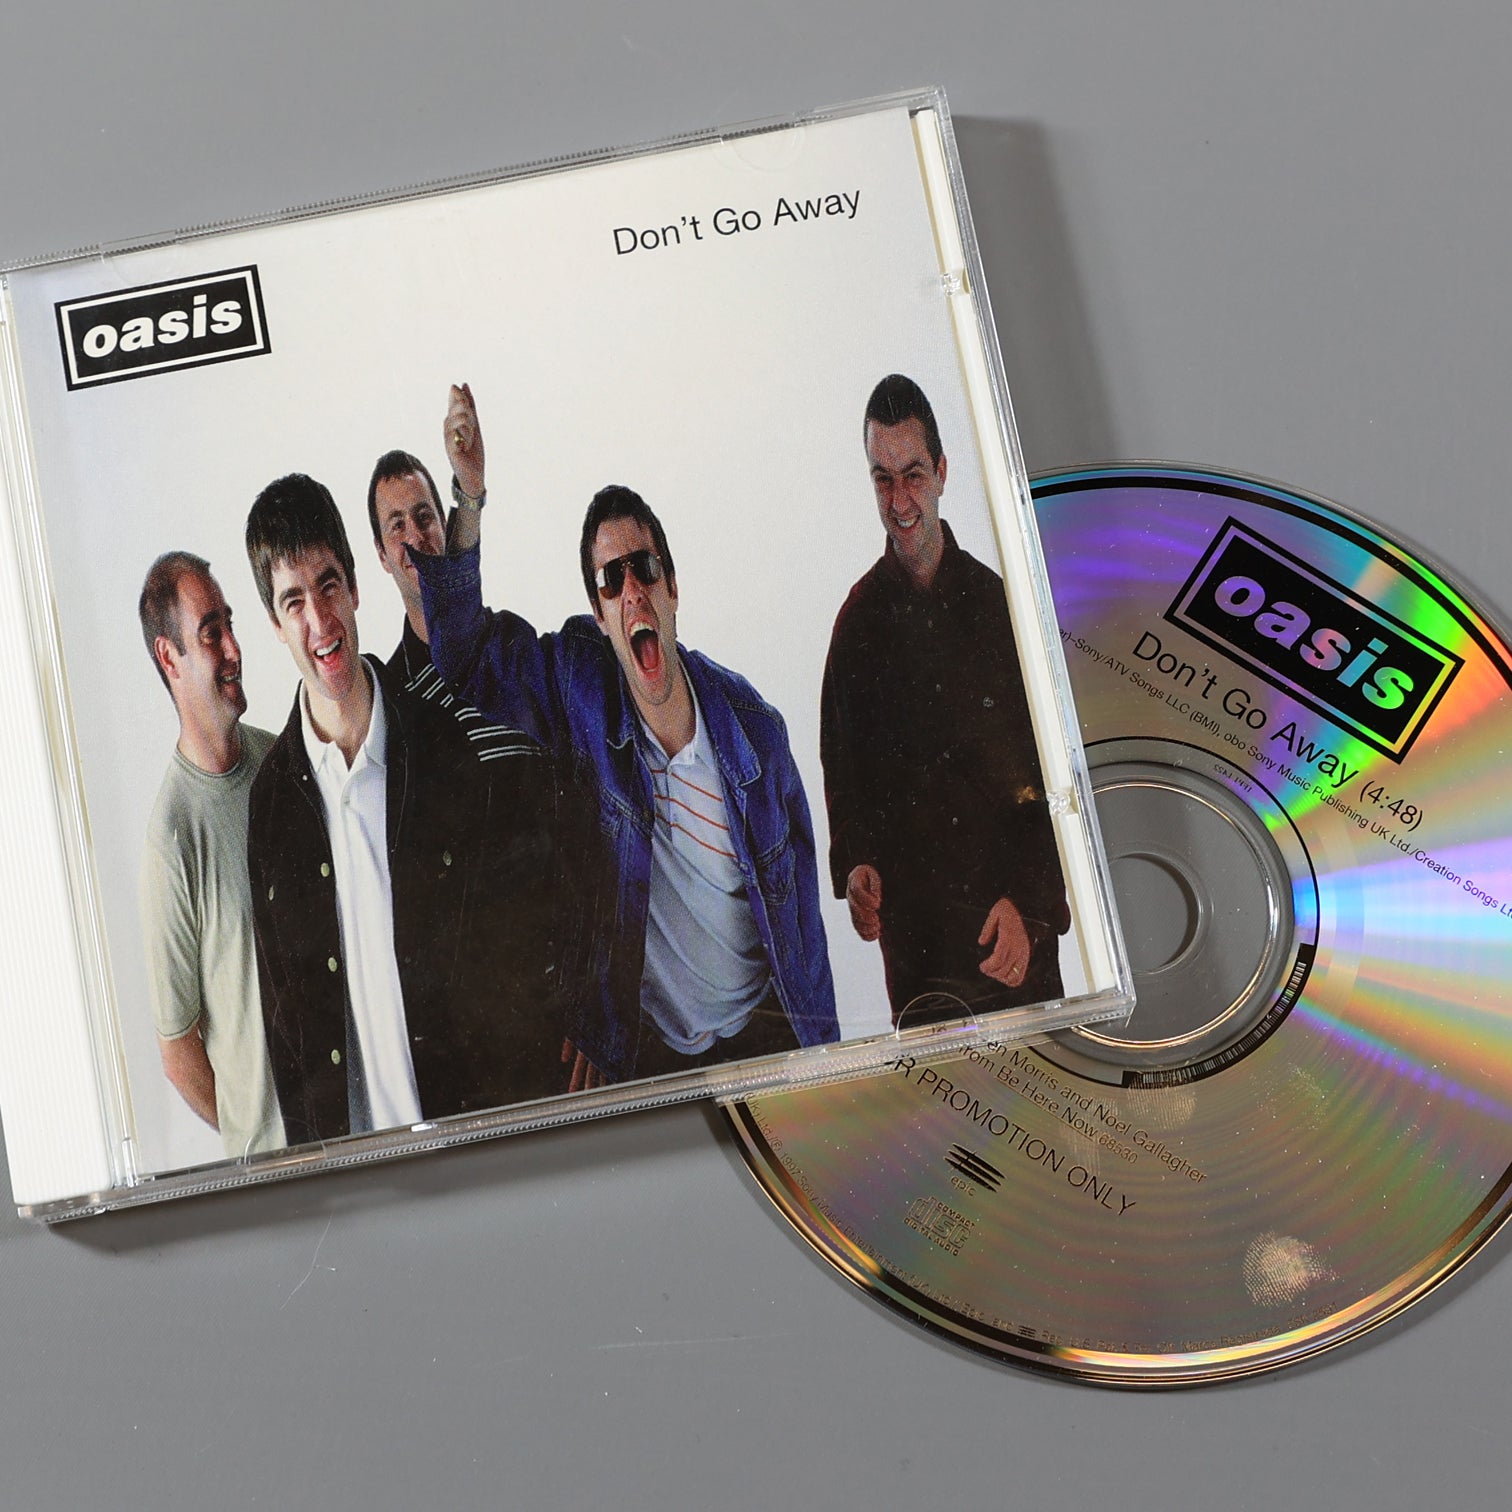 Oasis - Don't Go Away USA Promo CD - New Item